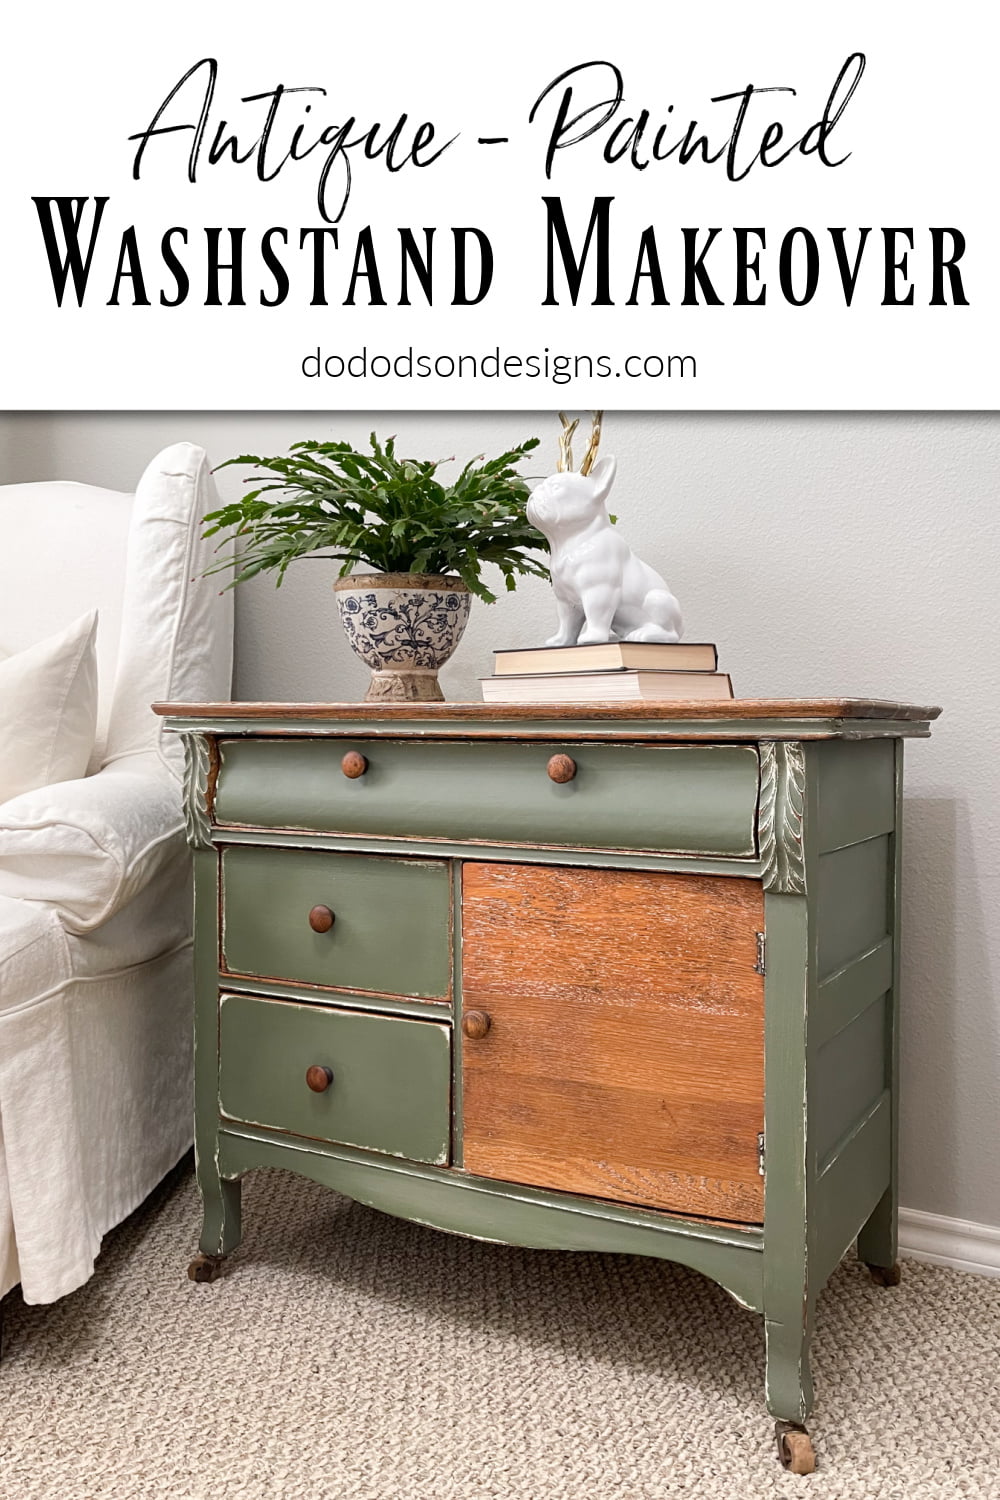 My Painted Antique Washstand Makeover - I found it on the curb!